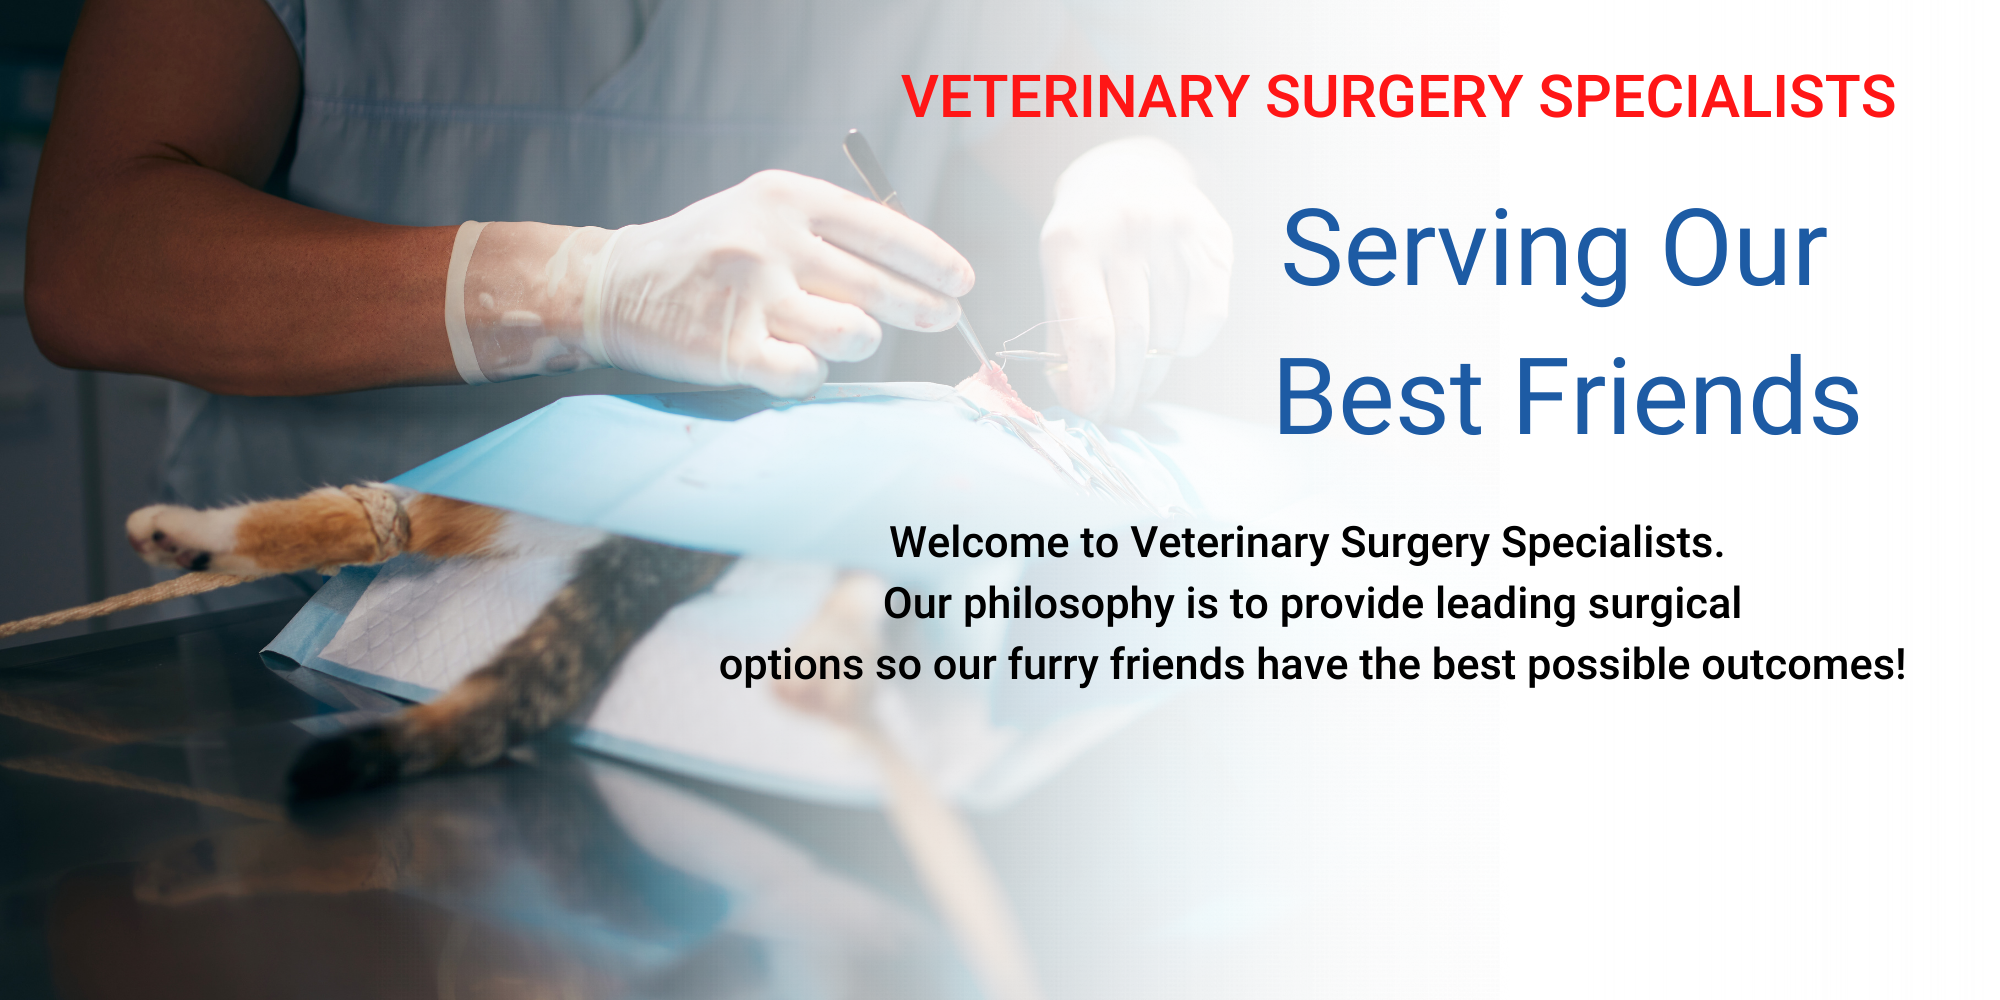 Veterinary Surgery Speicalists (1800 × 924 px) (2000 × 1000 px)